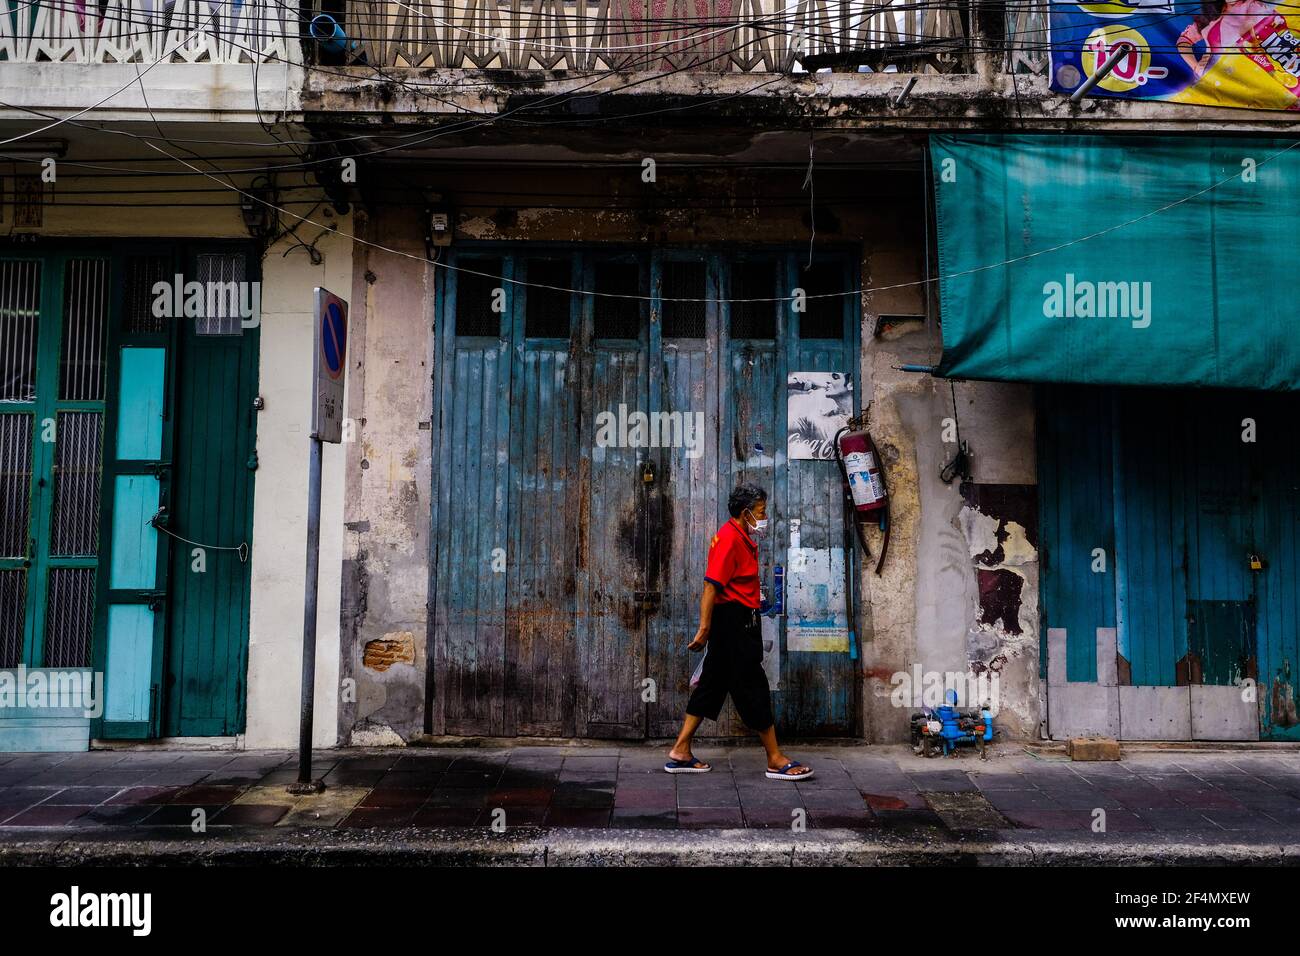 A woman in a bright red shirt walks past some old buildings in the Chinatown area of Bangkok, Thailand Stock Photo